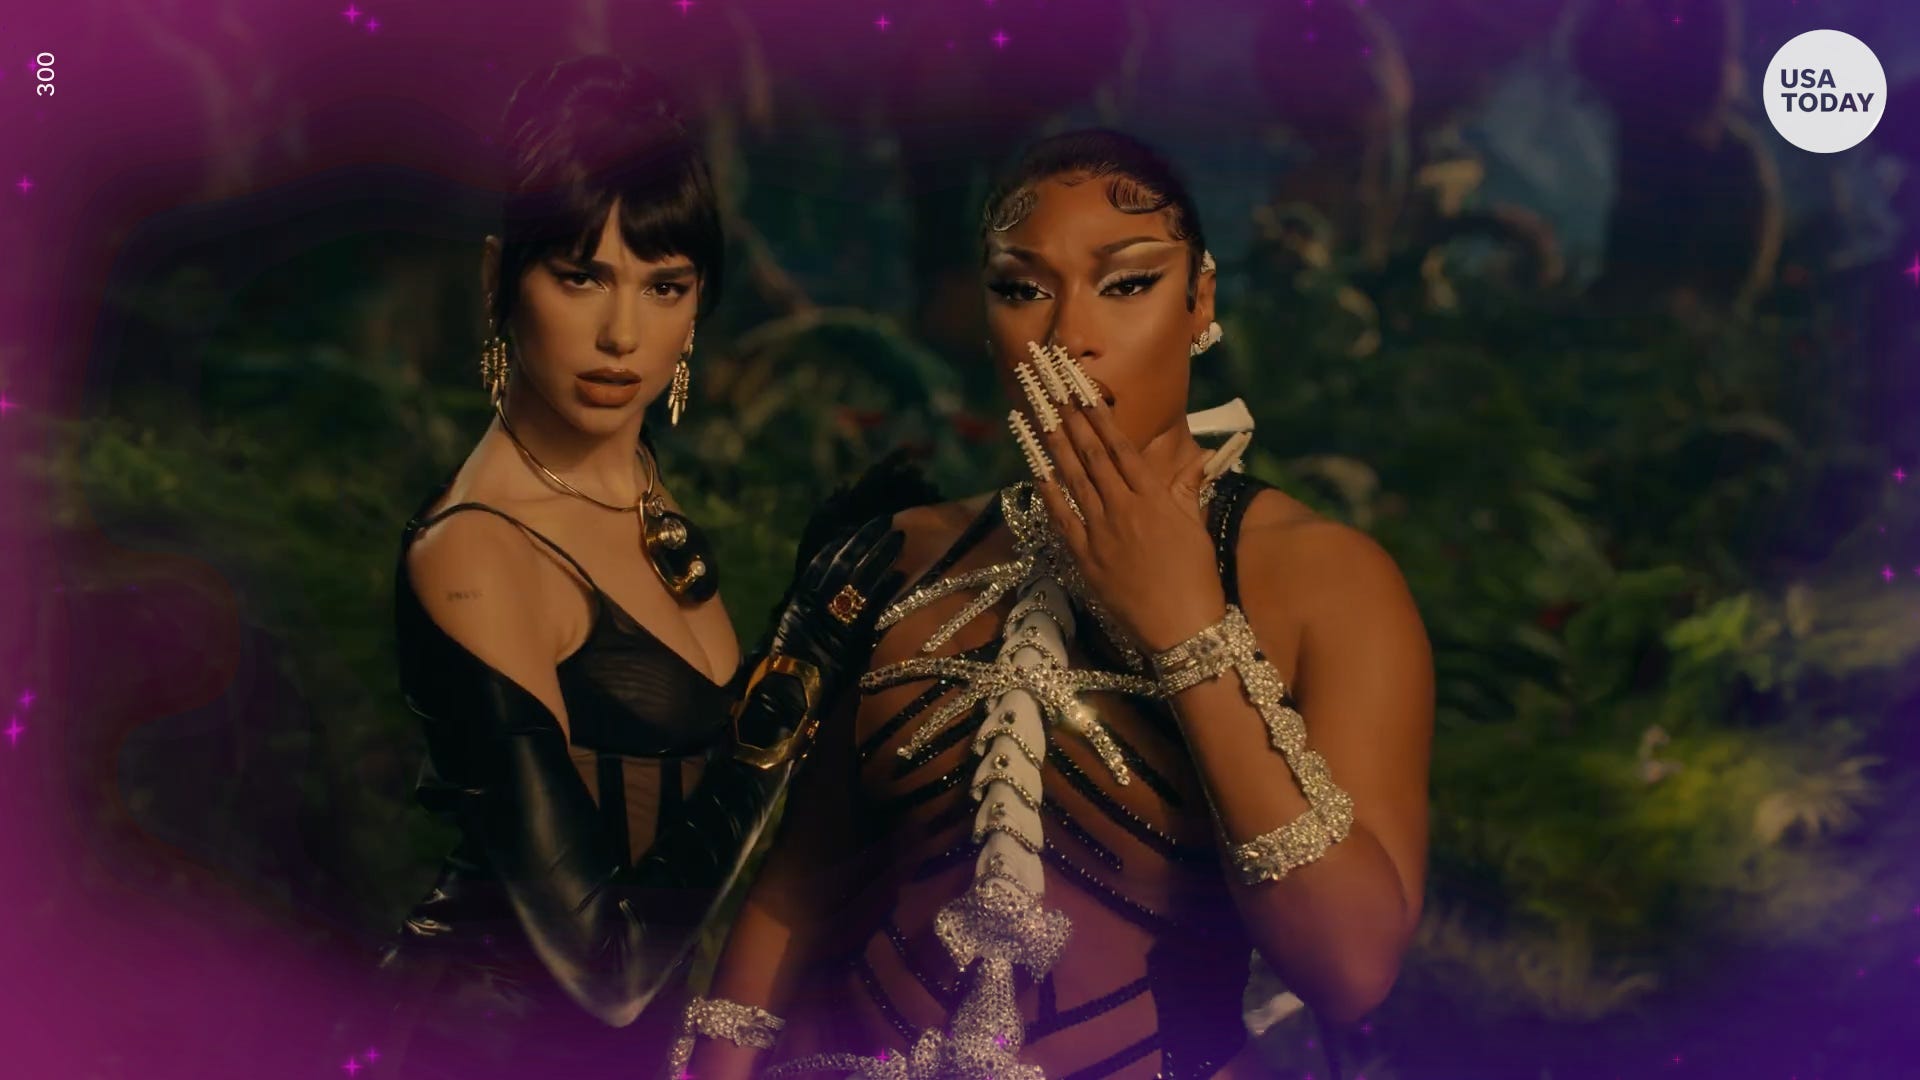 Megan Thee Stallion and Dua Lipa's 'Sweetest Pie' highlights new music releases thumbnail